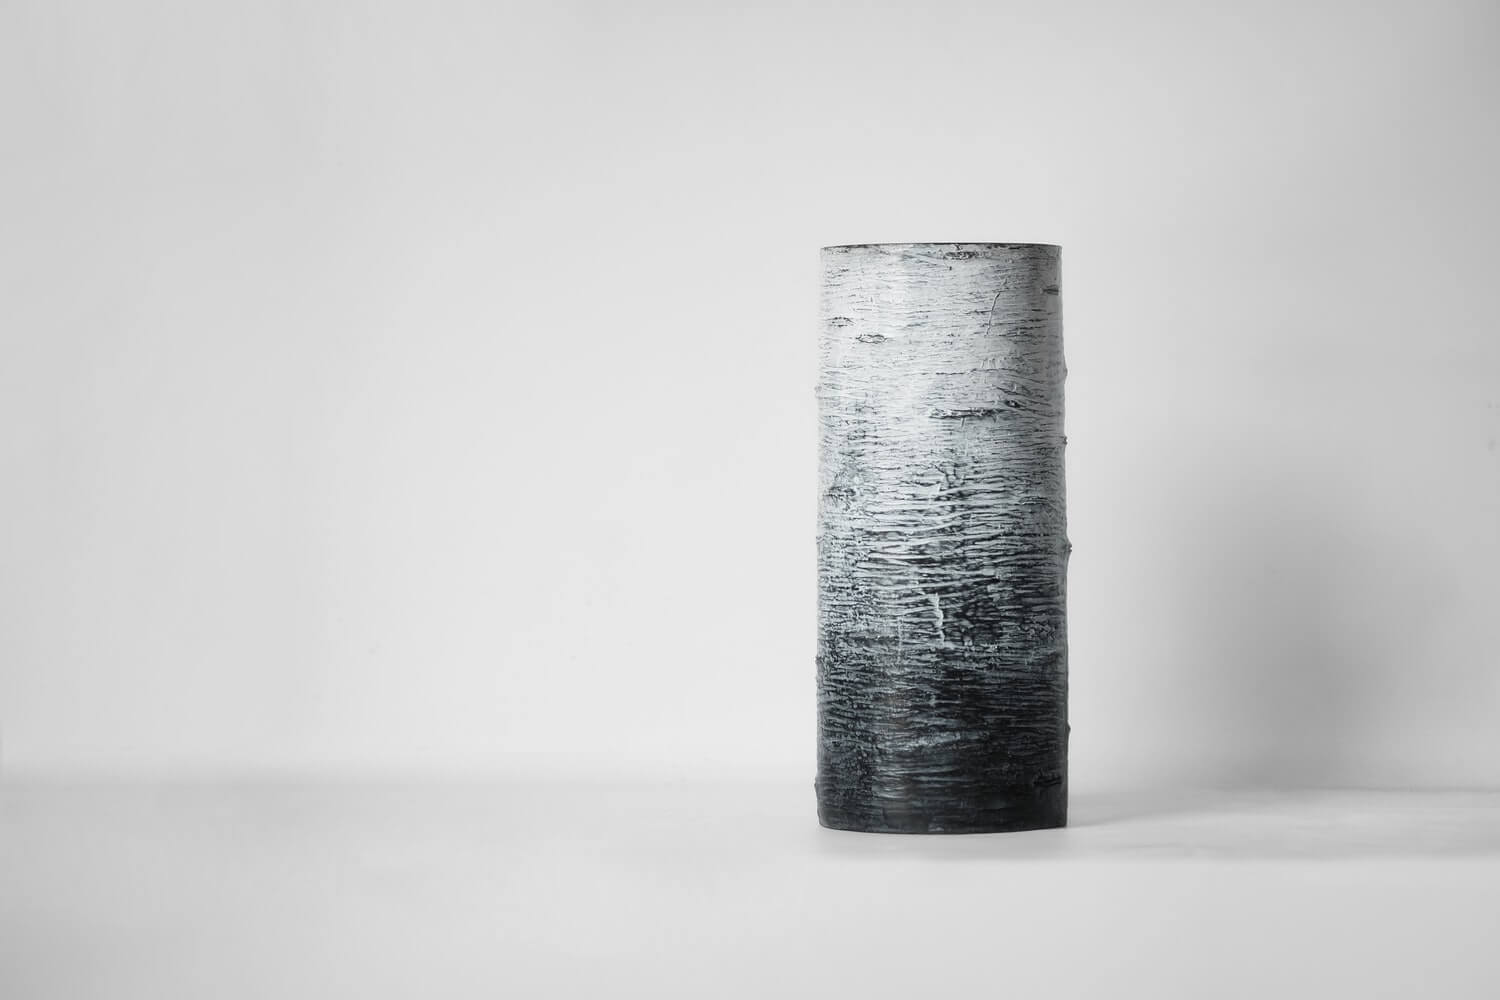 A textured cylindrical vase that has a gradient with white from the top transitioning to black.